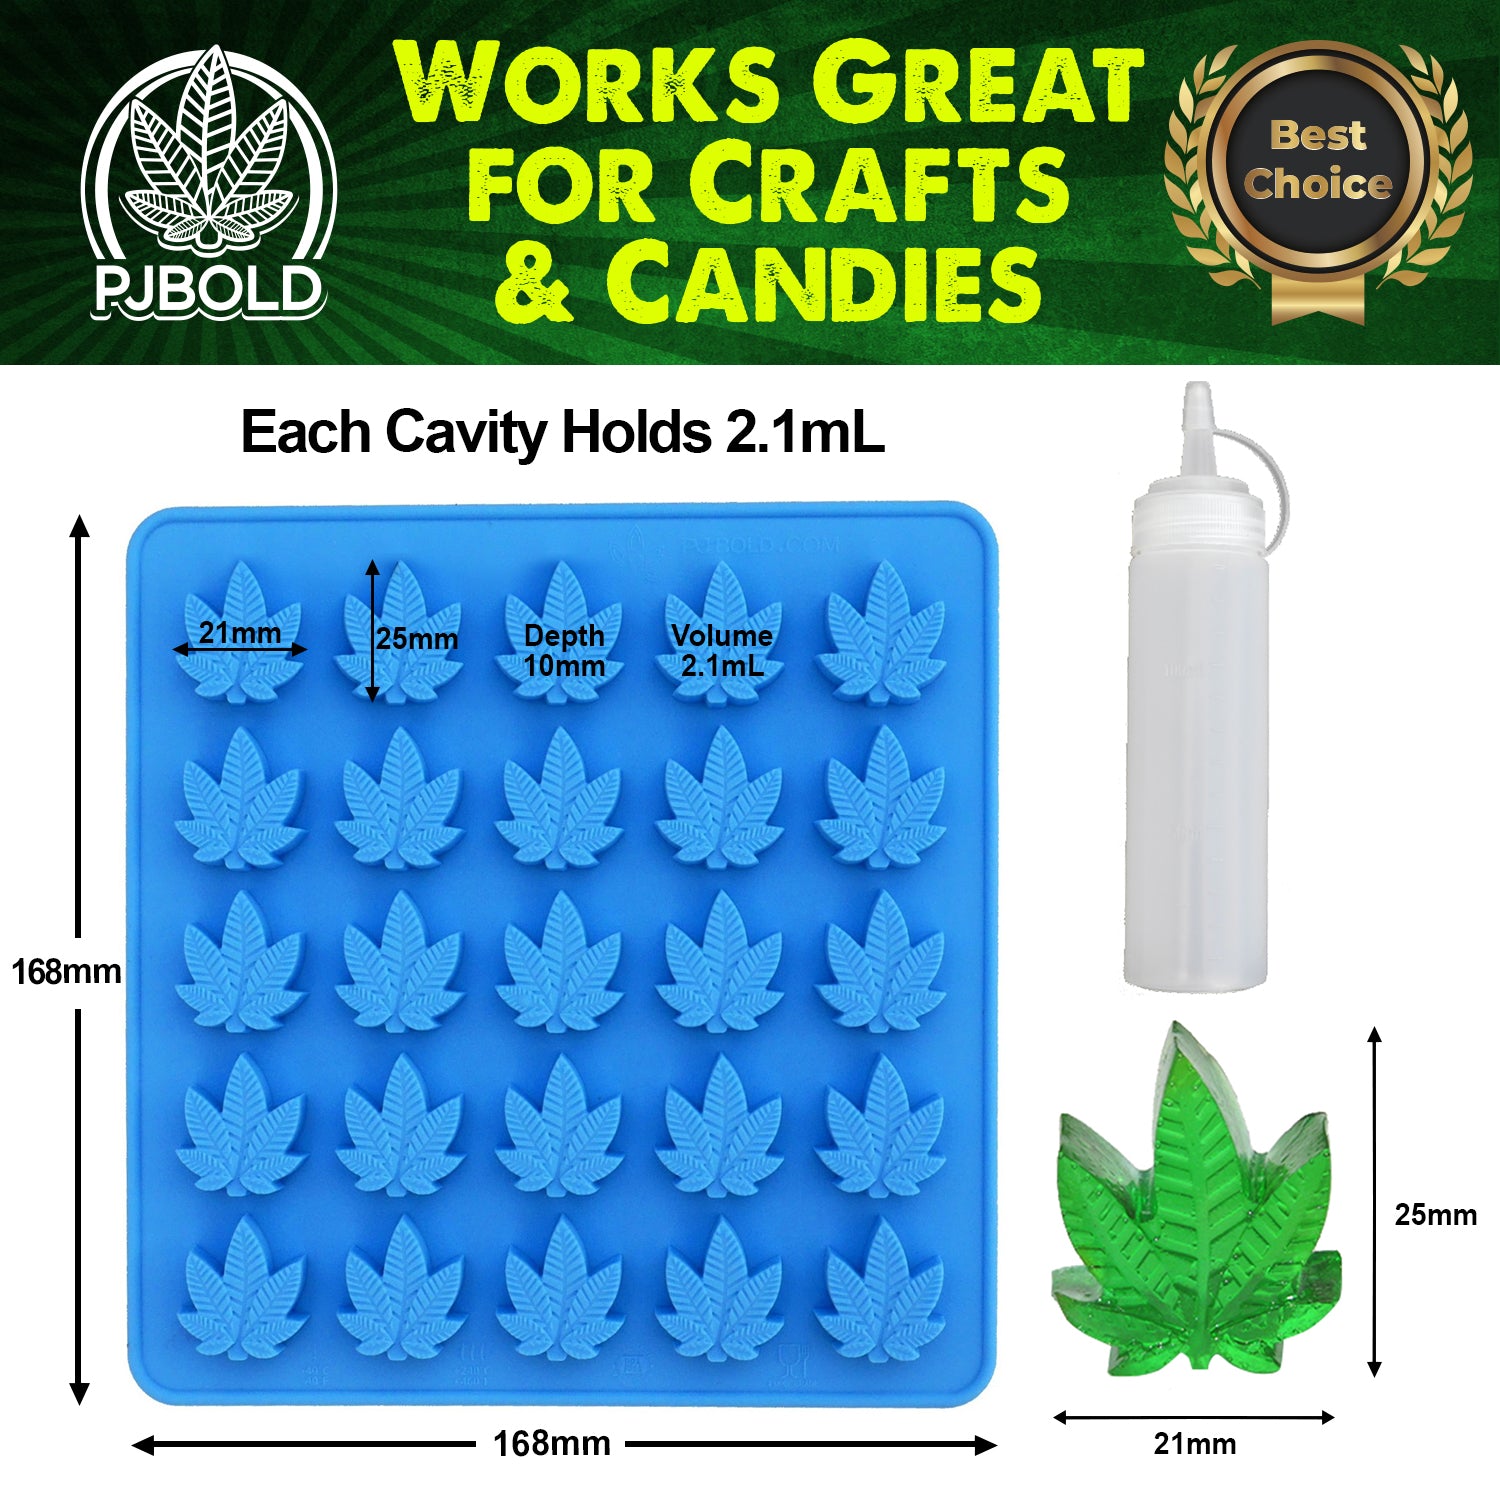 Pj Bold Gummy Leaf Silicone Candy Mold Party Novelty Gift - 3 Pack